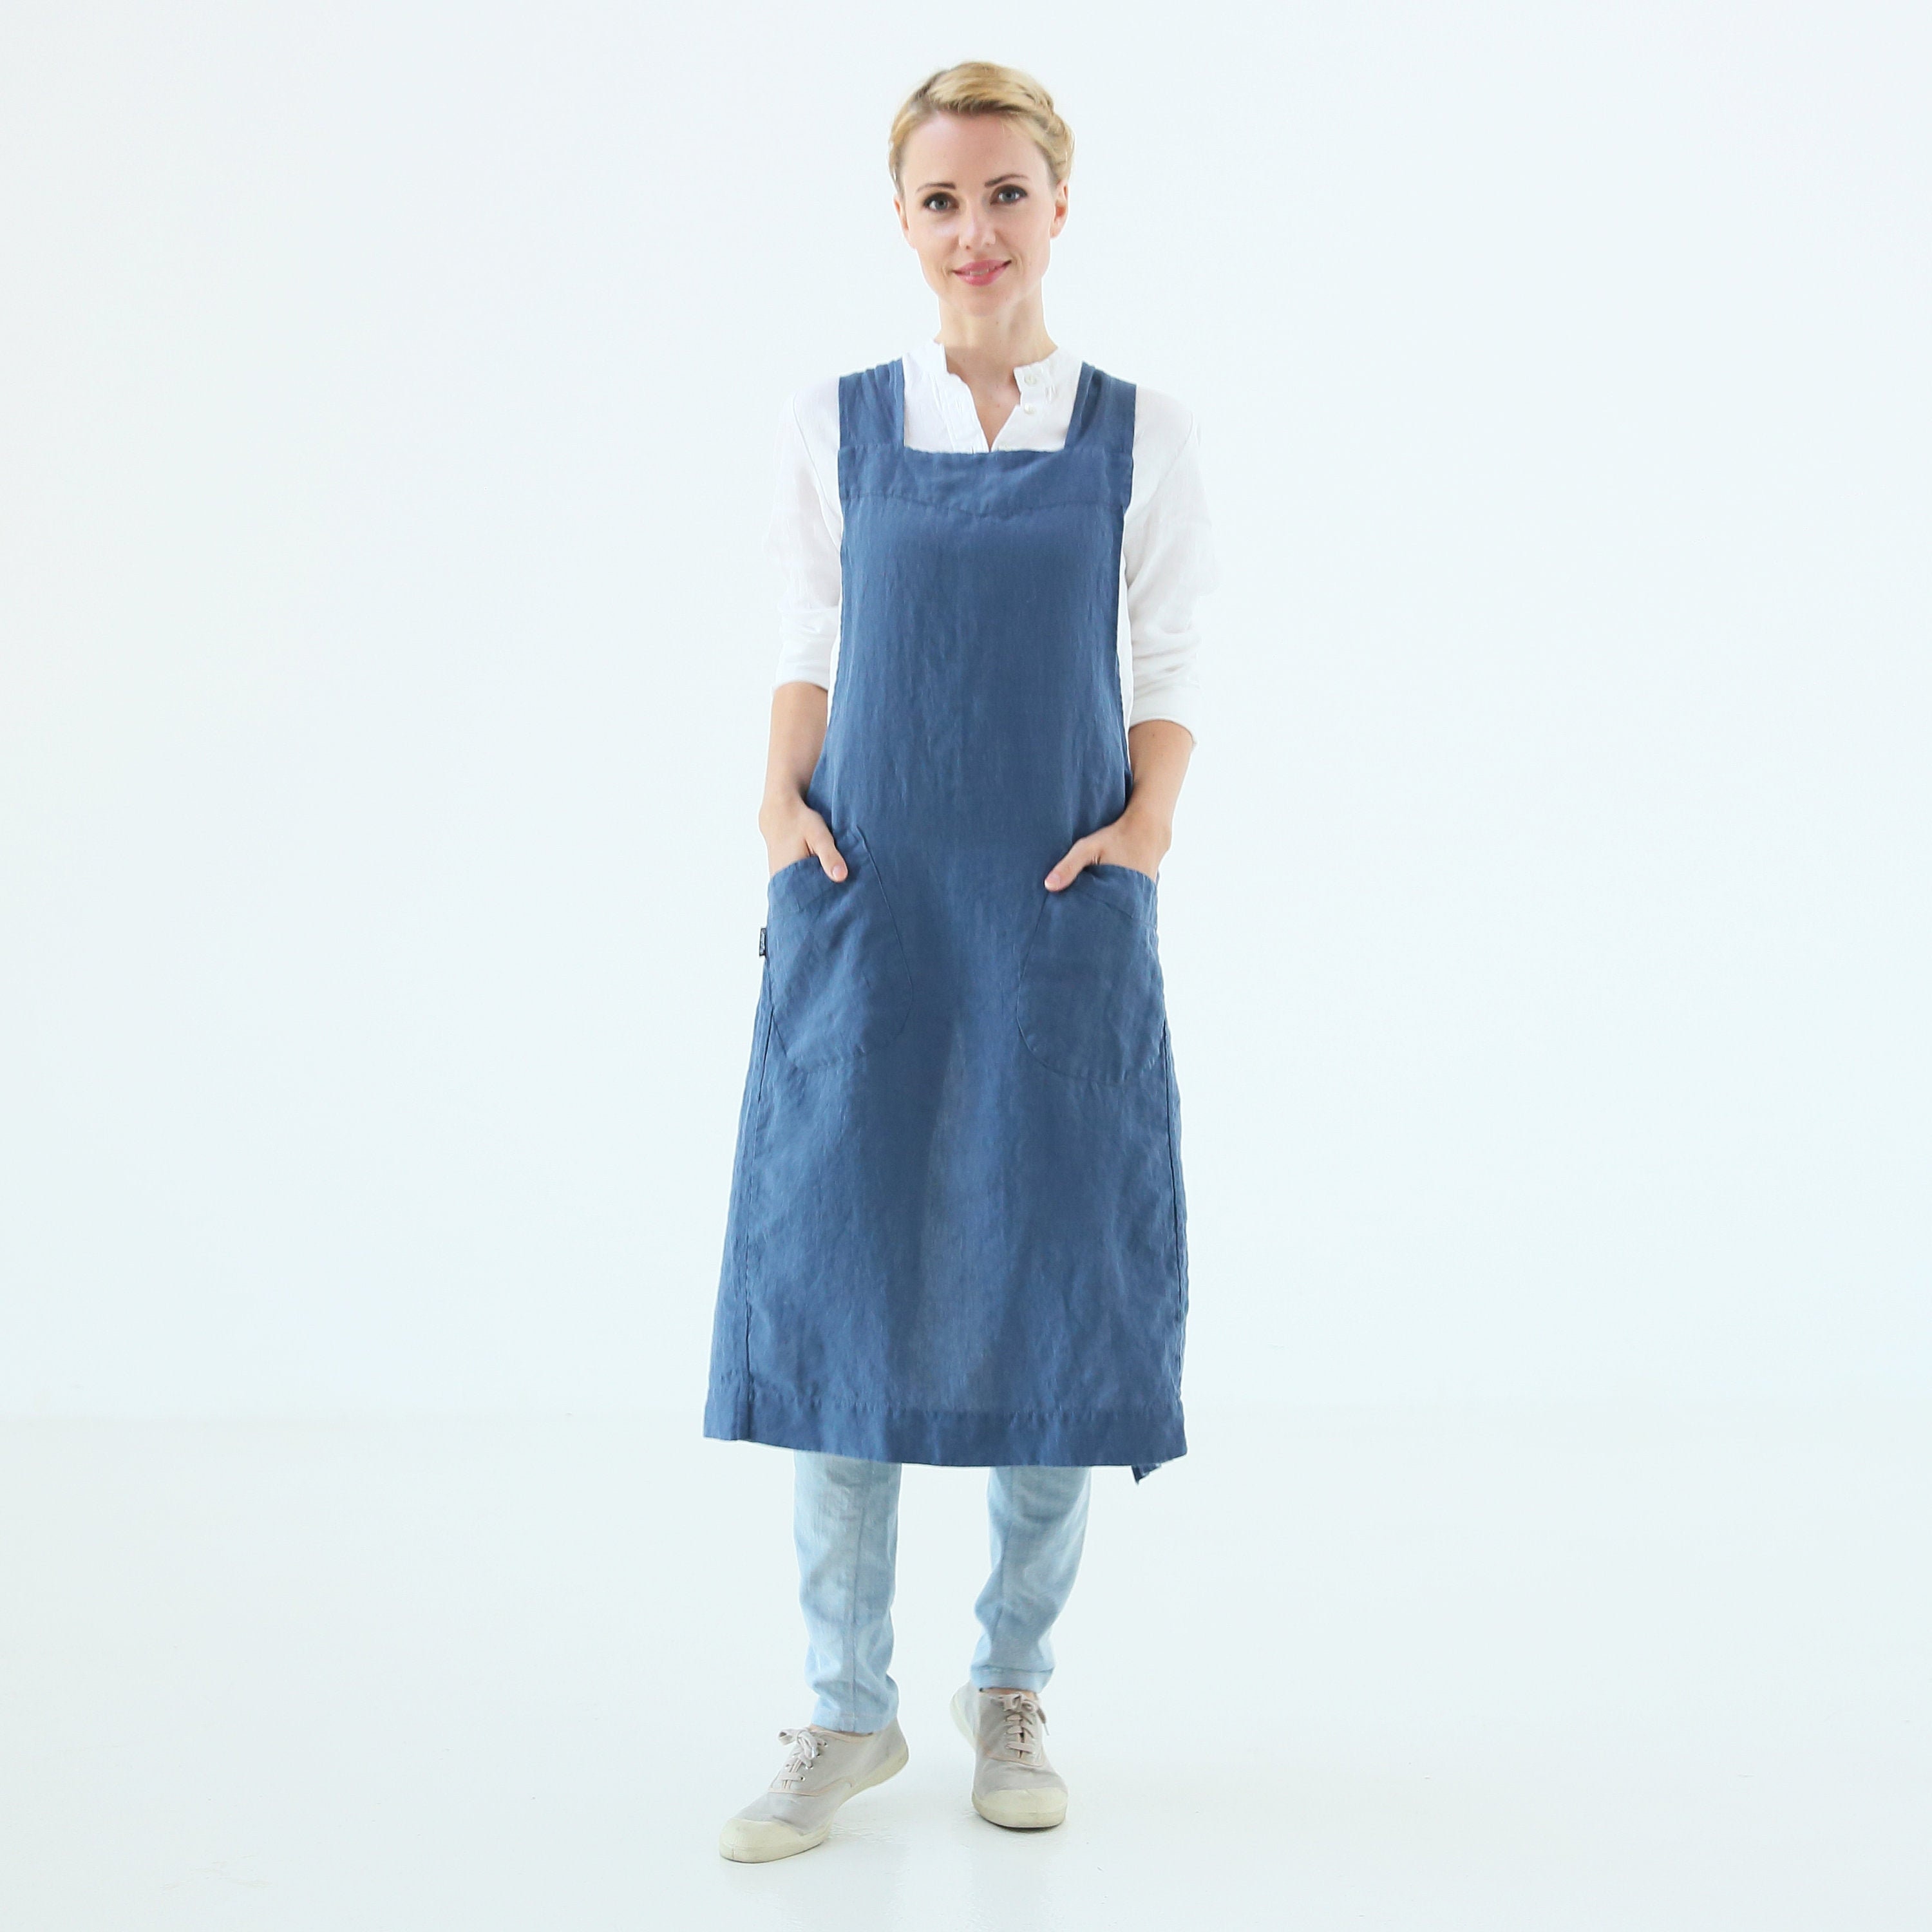  Occasion Gallery Navy Blue 100% Linen Criss Cross Back Apron -  28 x 35 Full Length : Home & Kitchen